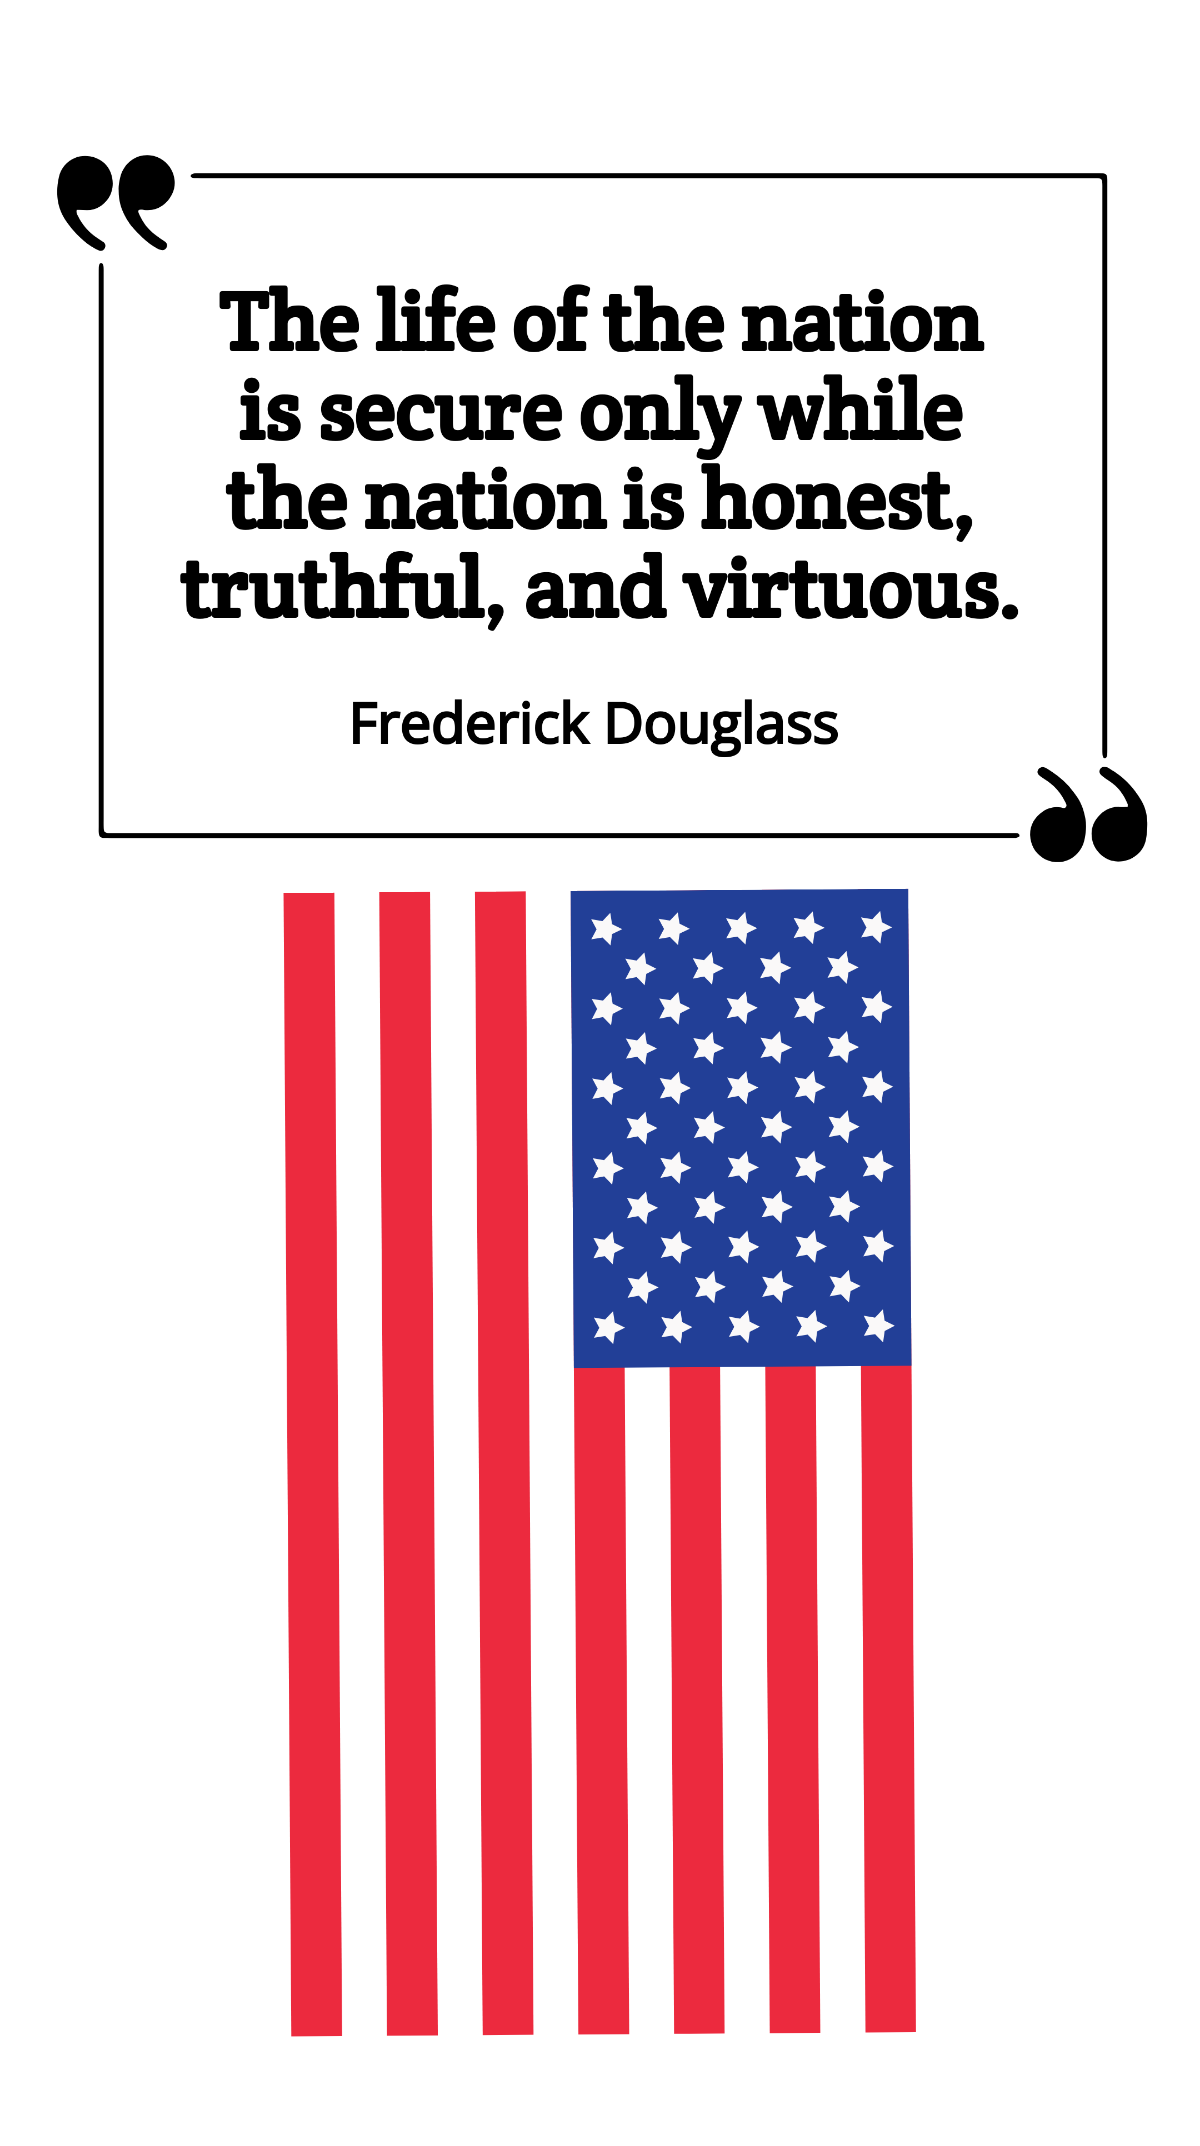 Frederick Douglass - The life of the nation is secure only while the nation is honest, truthful, and virtuous. Template